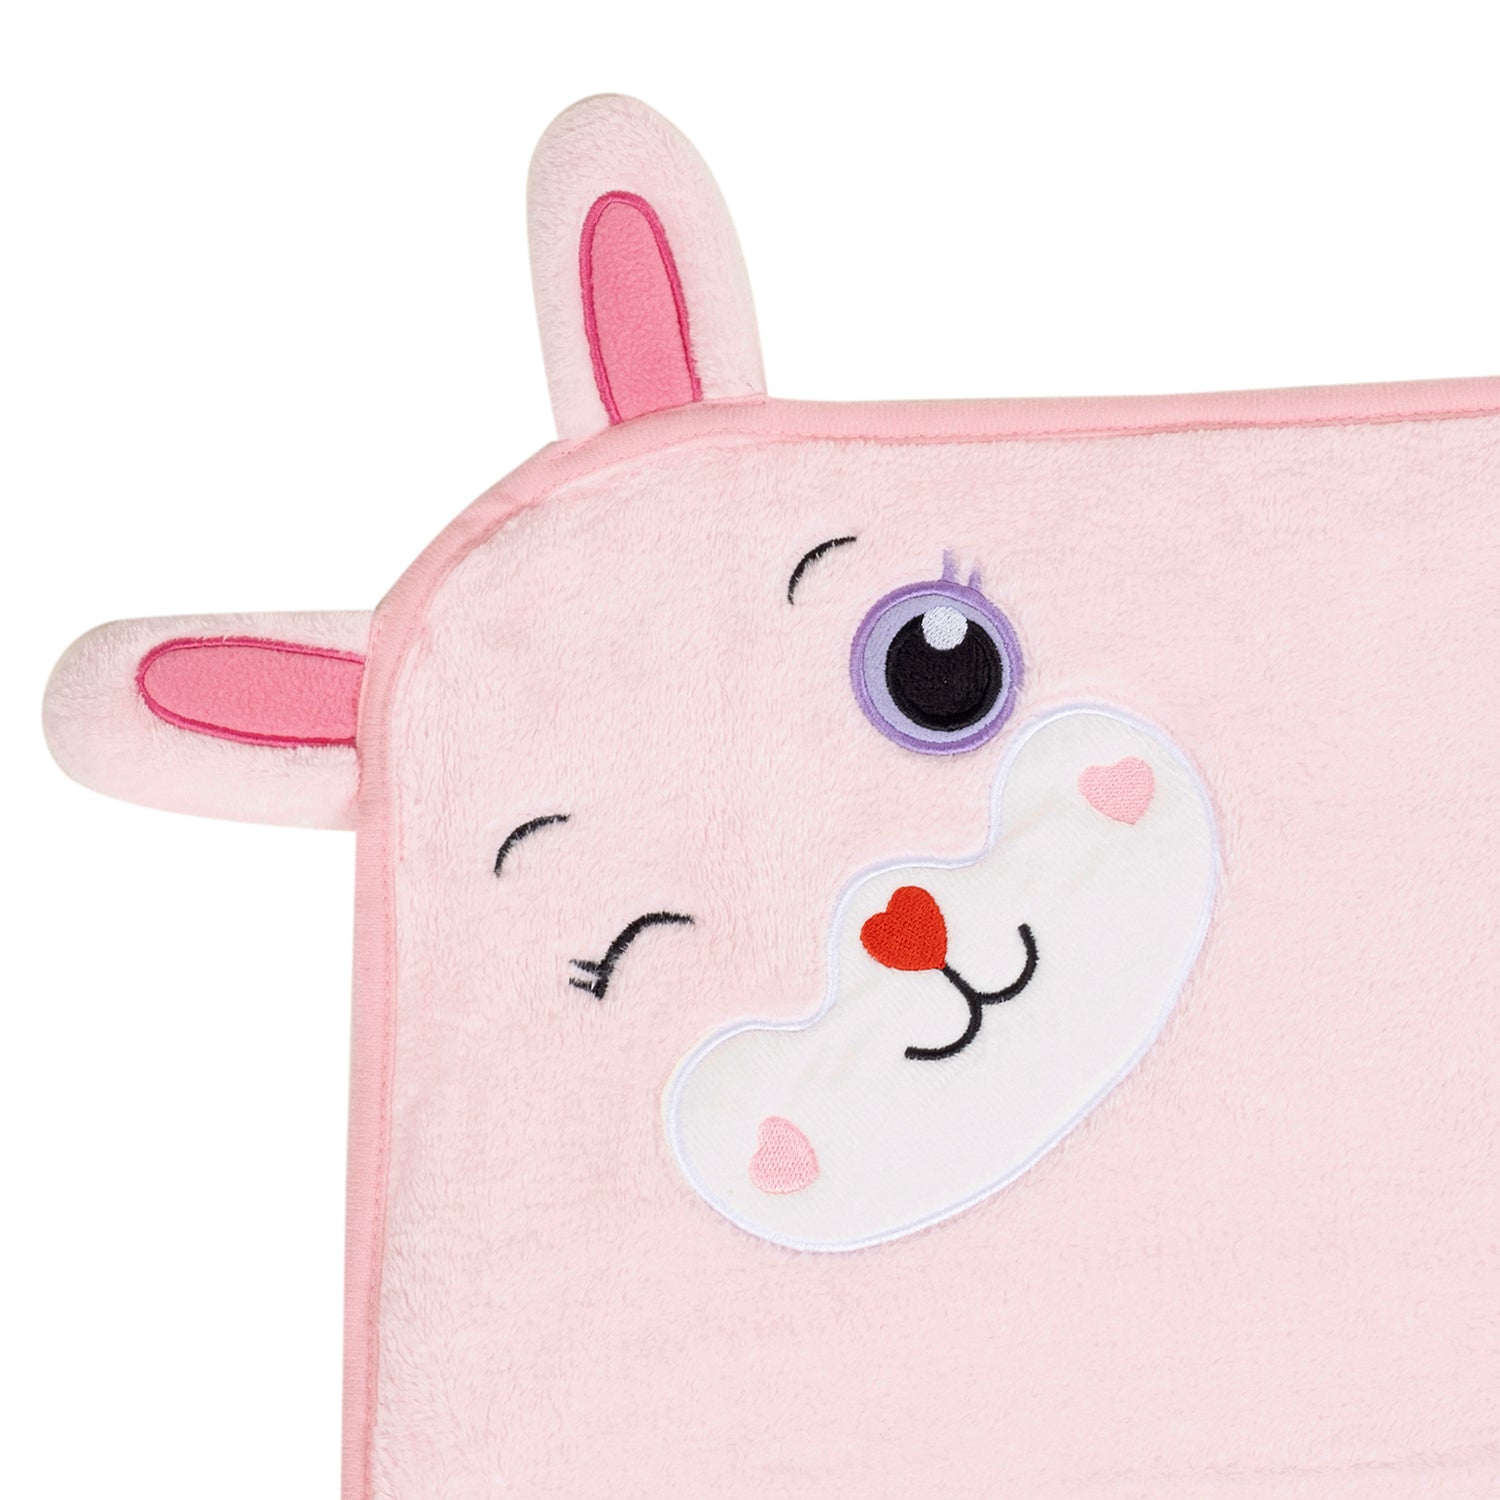 Baby Moo Rabbit Applique with 3D Ears Soft Blanket - Pink